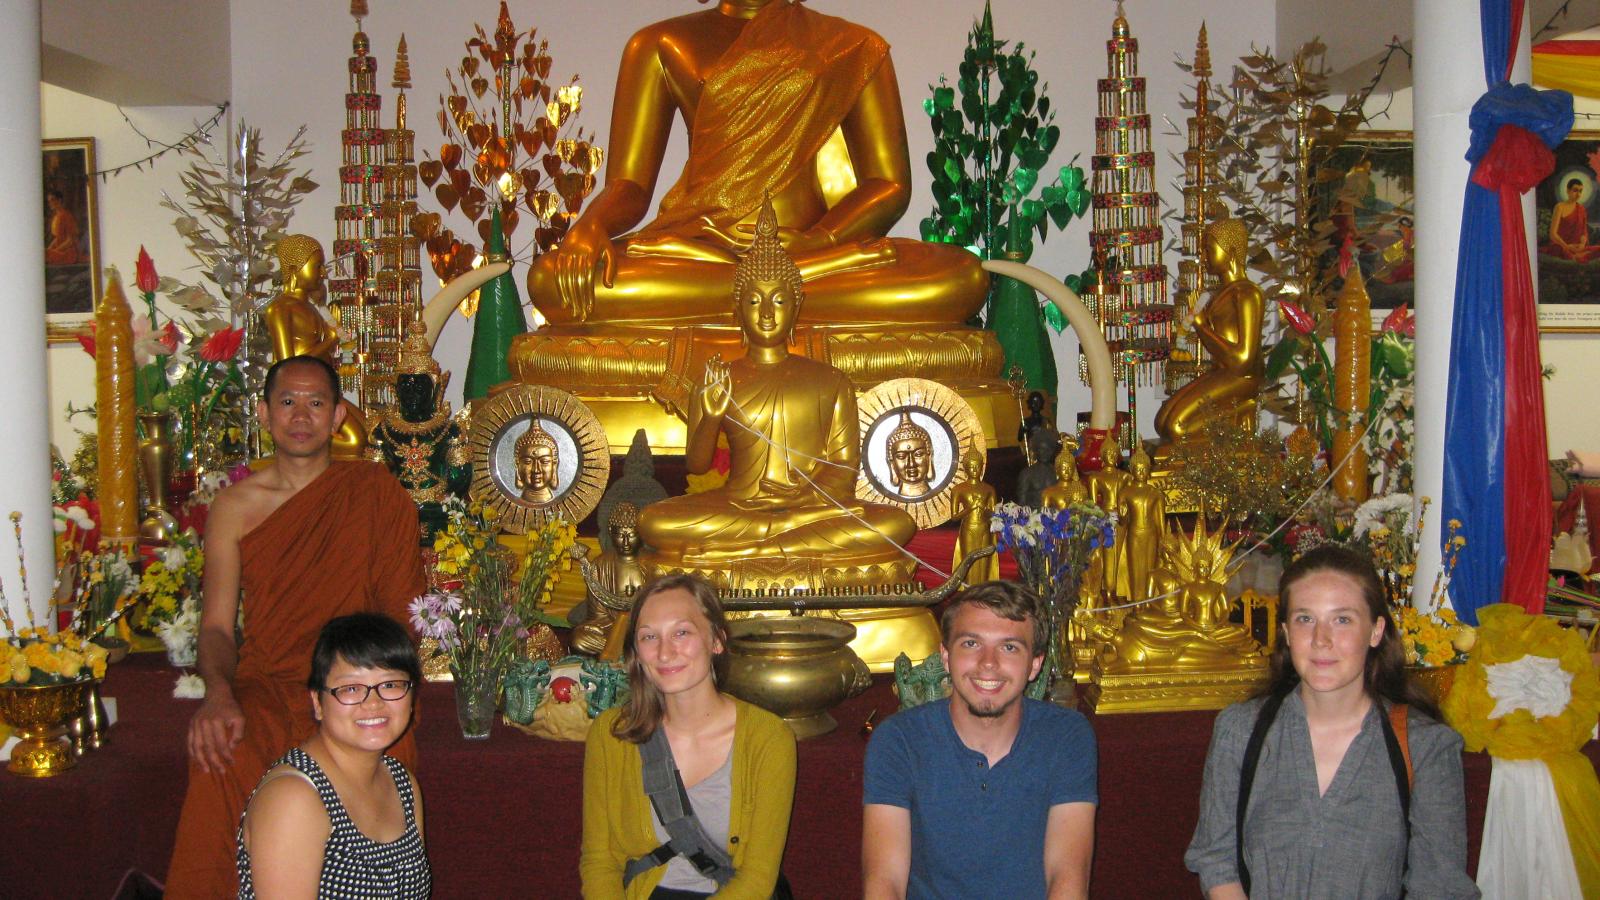 Field research students Dan, Ada, Austin and Kati pictured with Wat Buddhasamakidham Theravada monk Ajanh Sun inside the barn temple. 